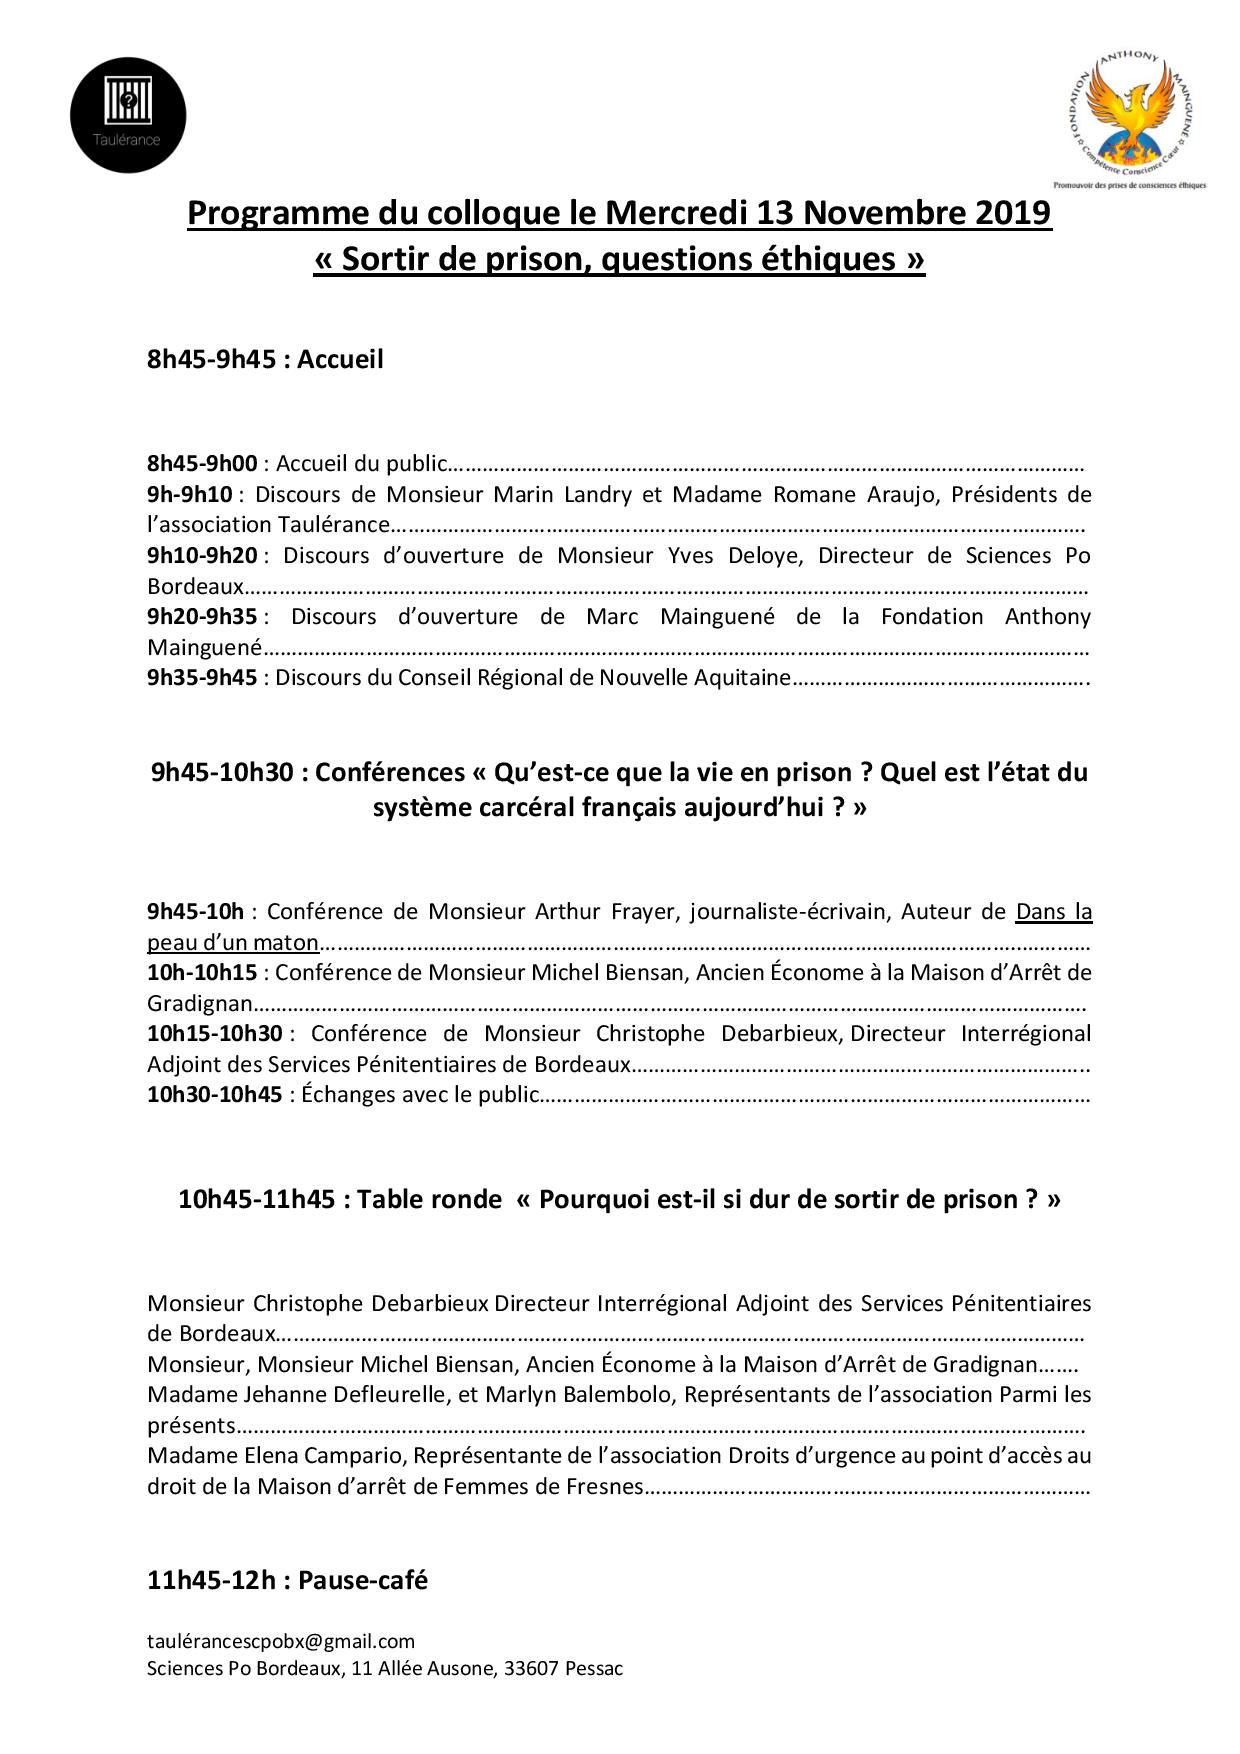 Programme colloque taule rance page 001